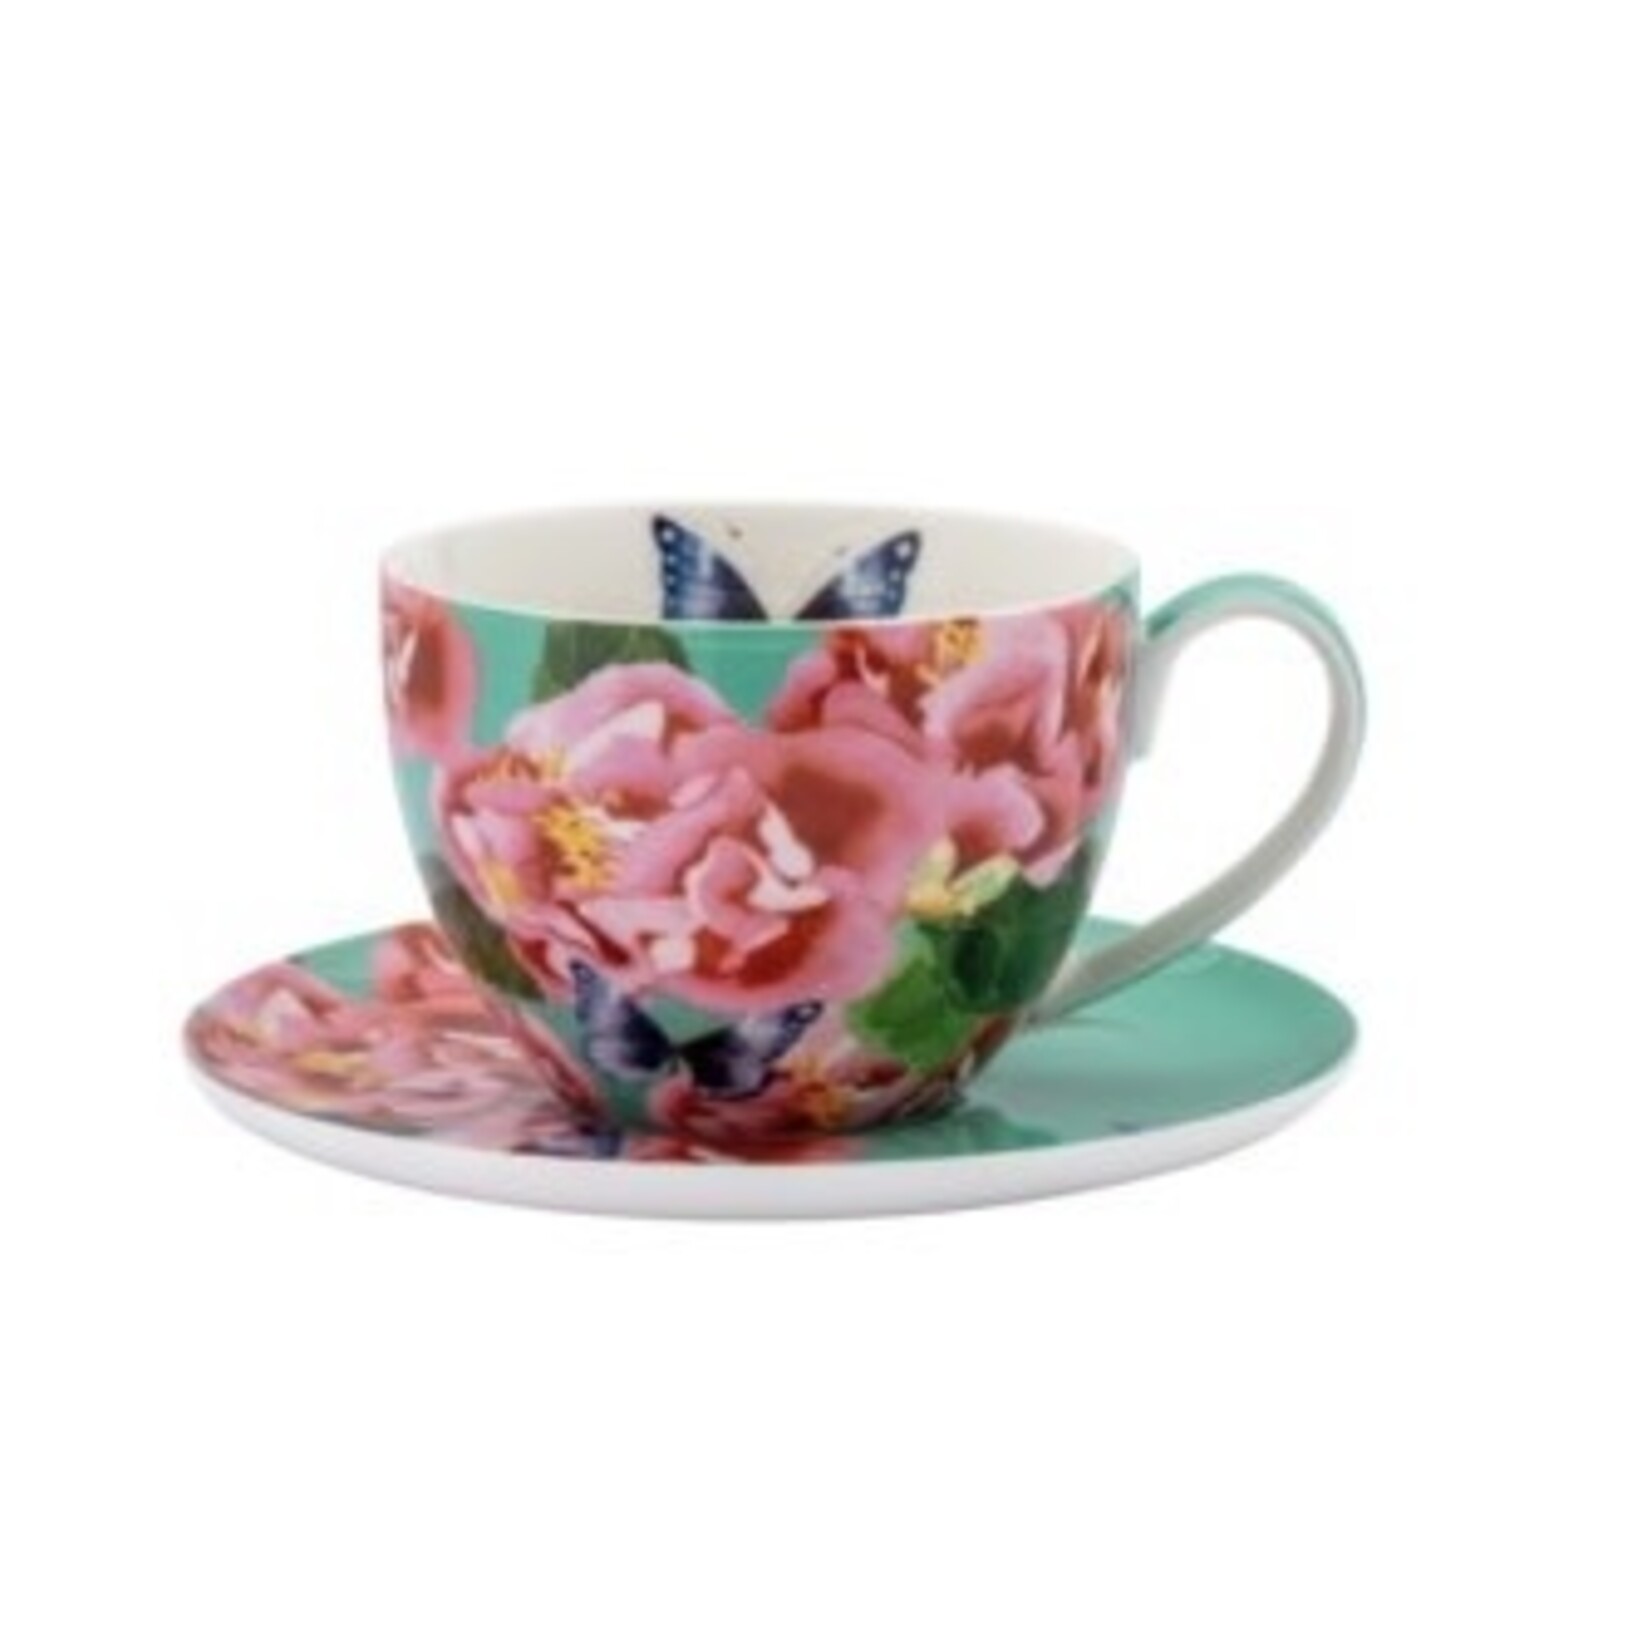 MAXWELL WILLIAMS MAXWELL WILLIAMS Cup & Saucer - Posey Camella